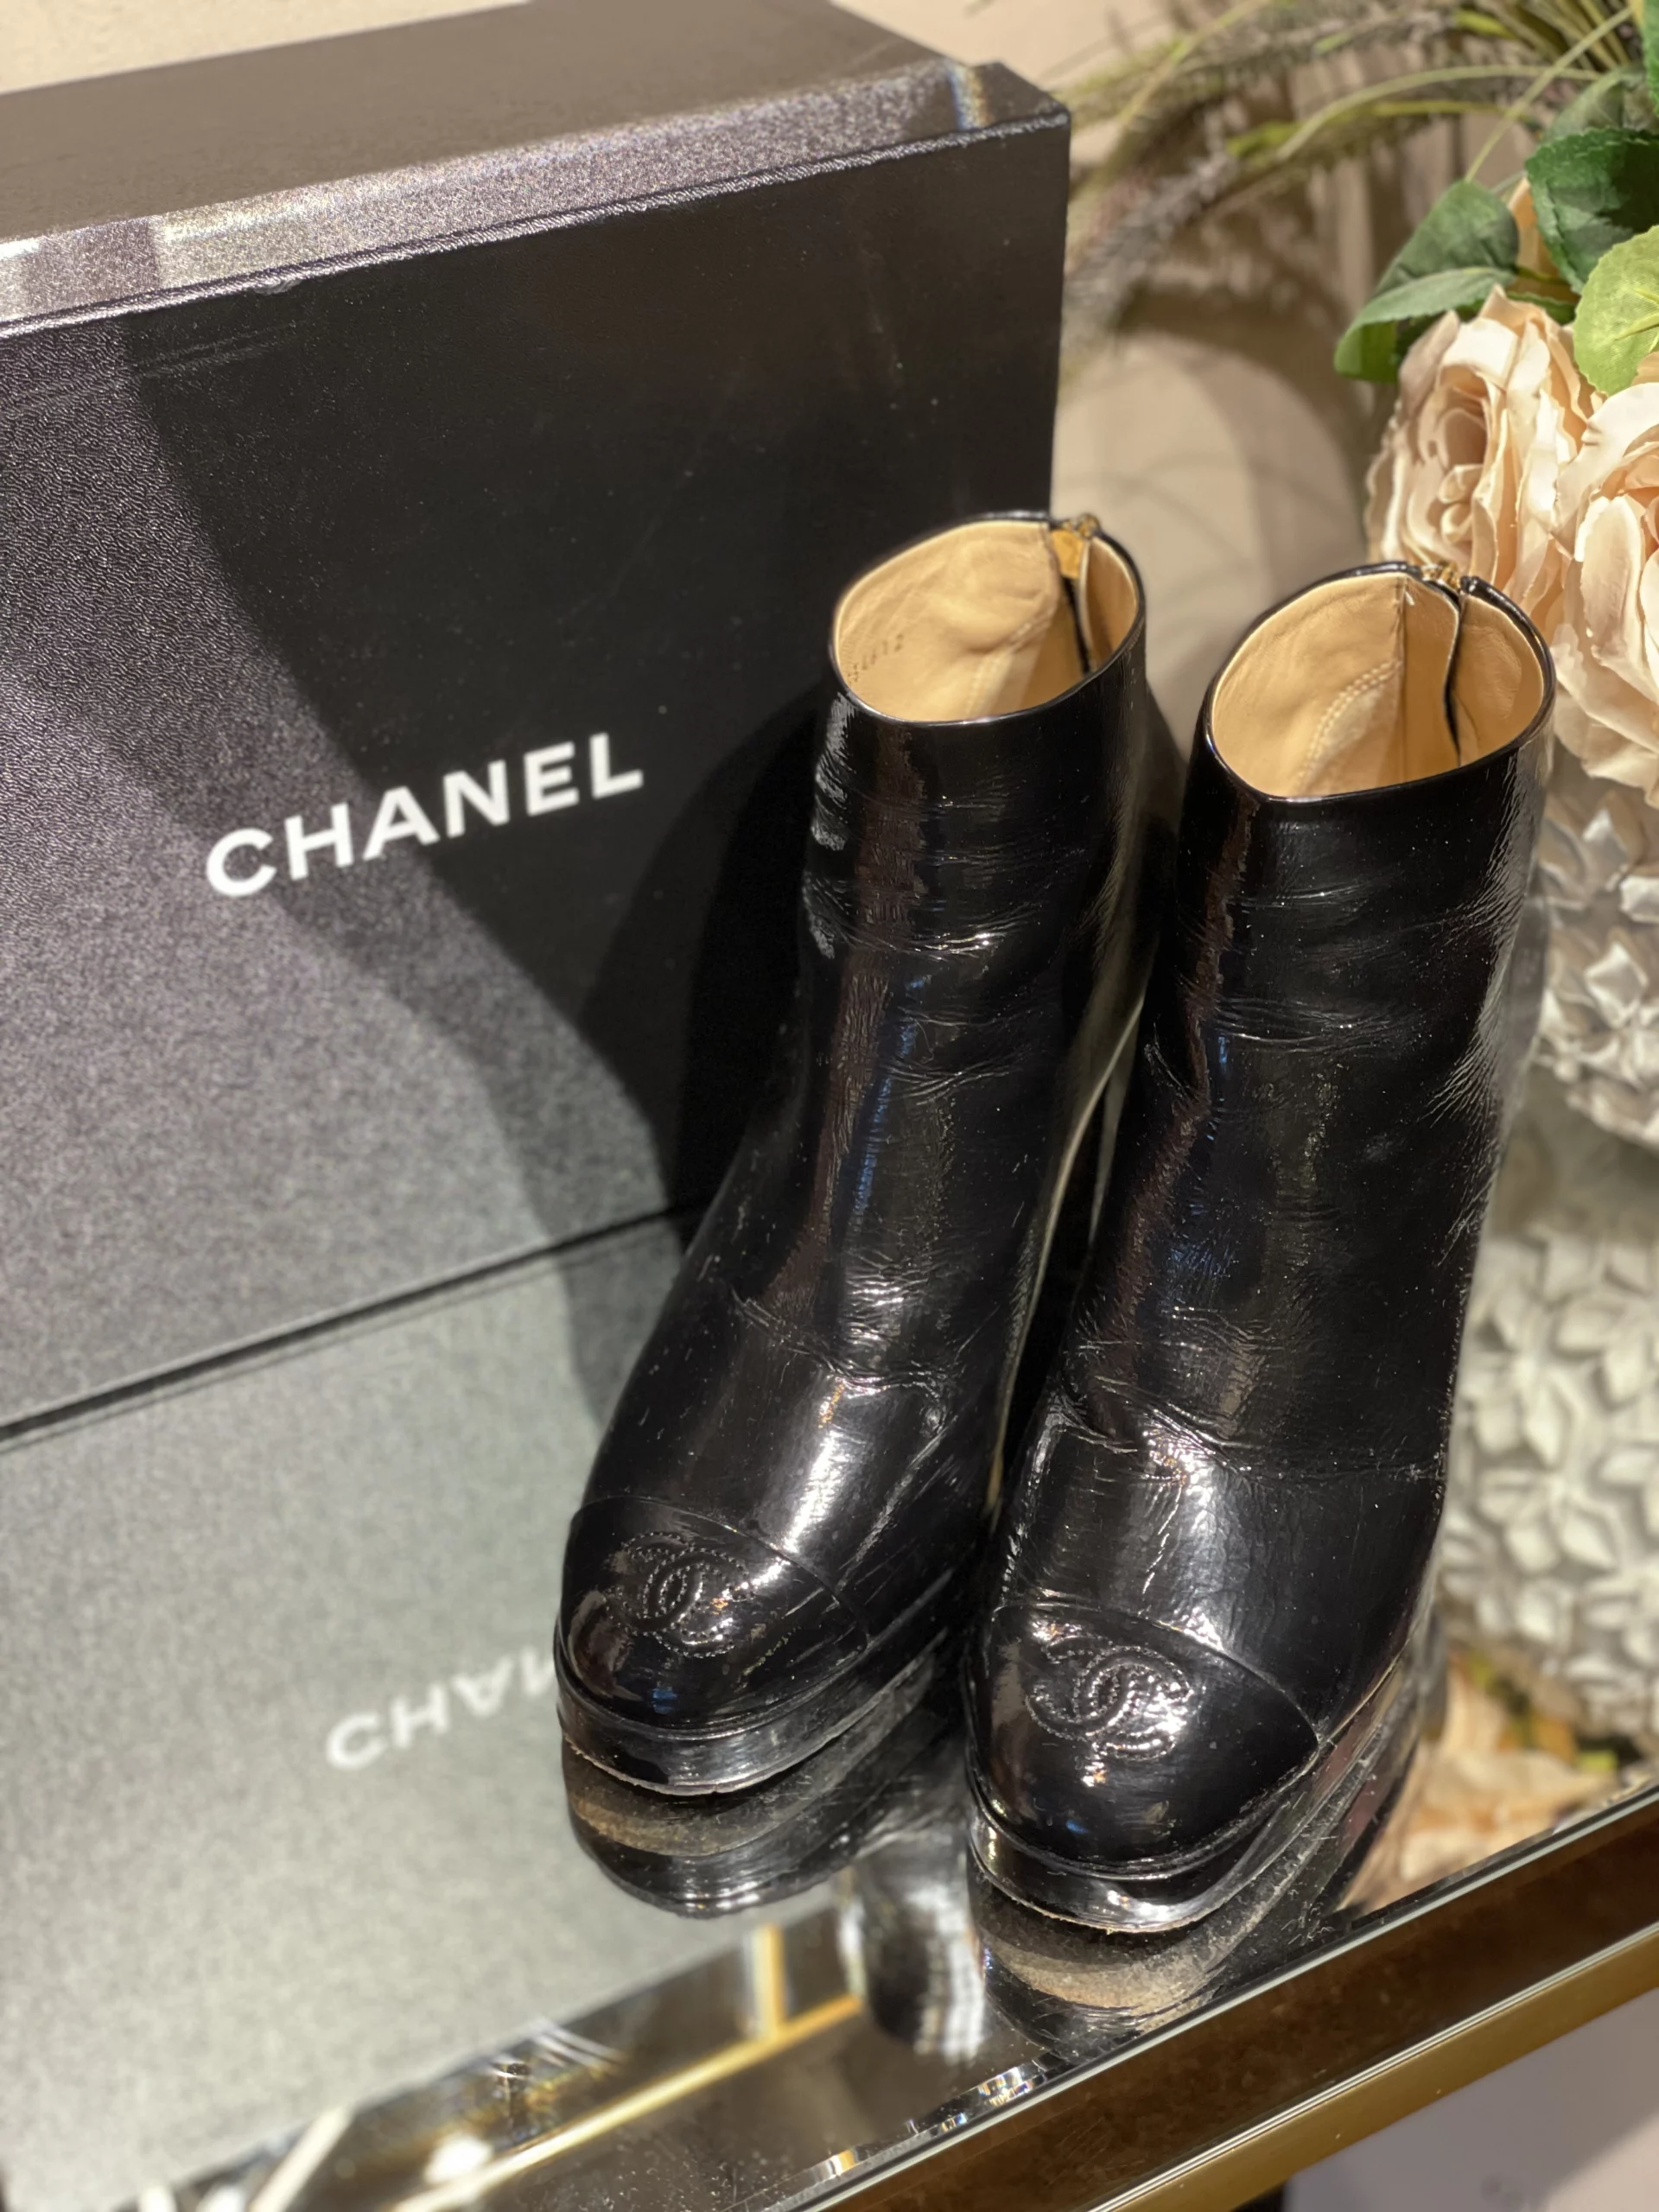 Chanel Patent Leather Ankle Boots Size 39 (UK 6) - Dress Cheshire |  Preloved Designer Fashion | Boutique in Cheshire